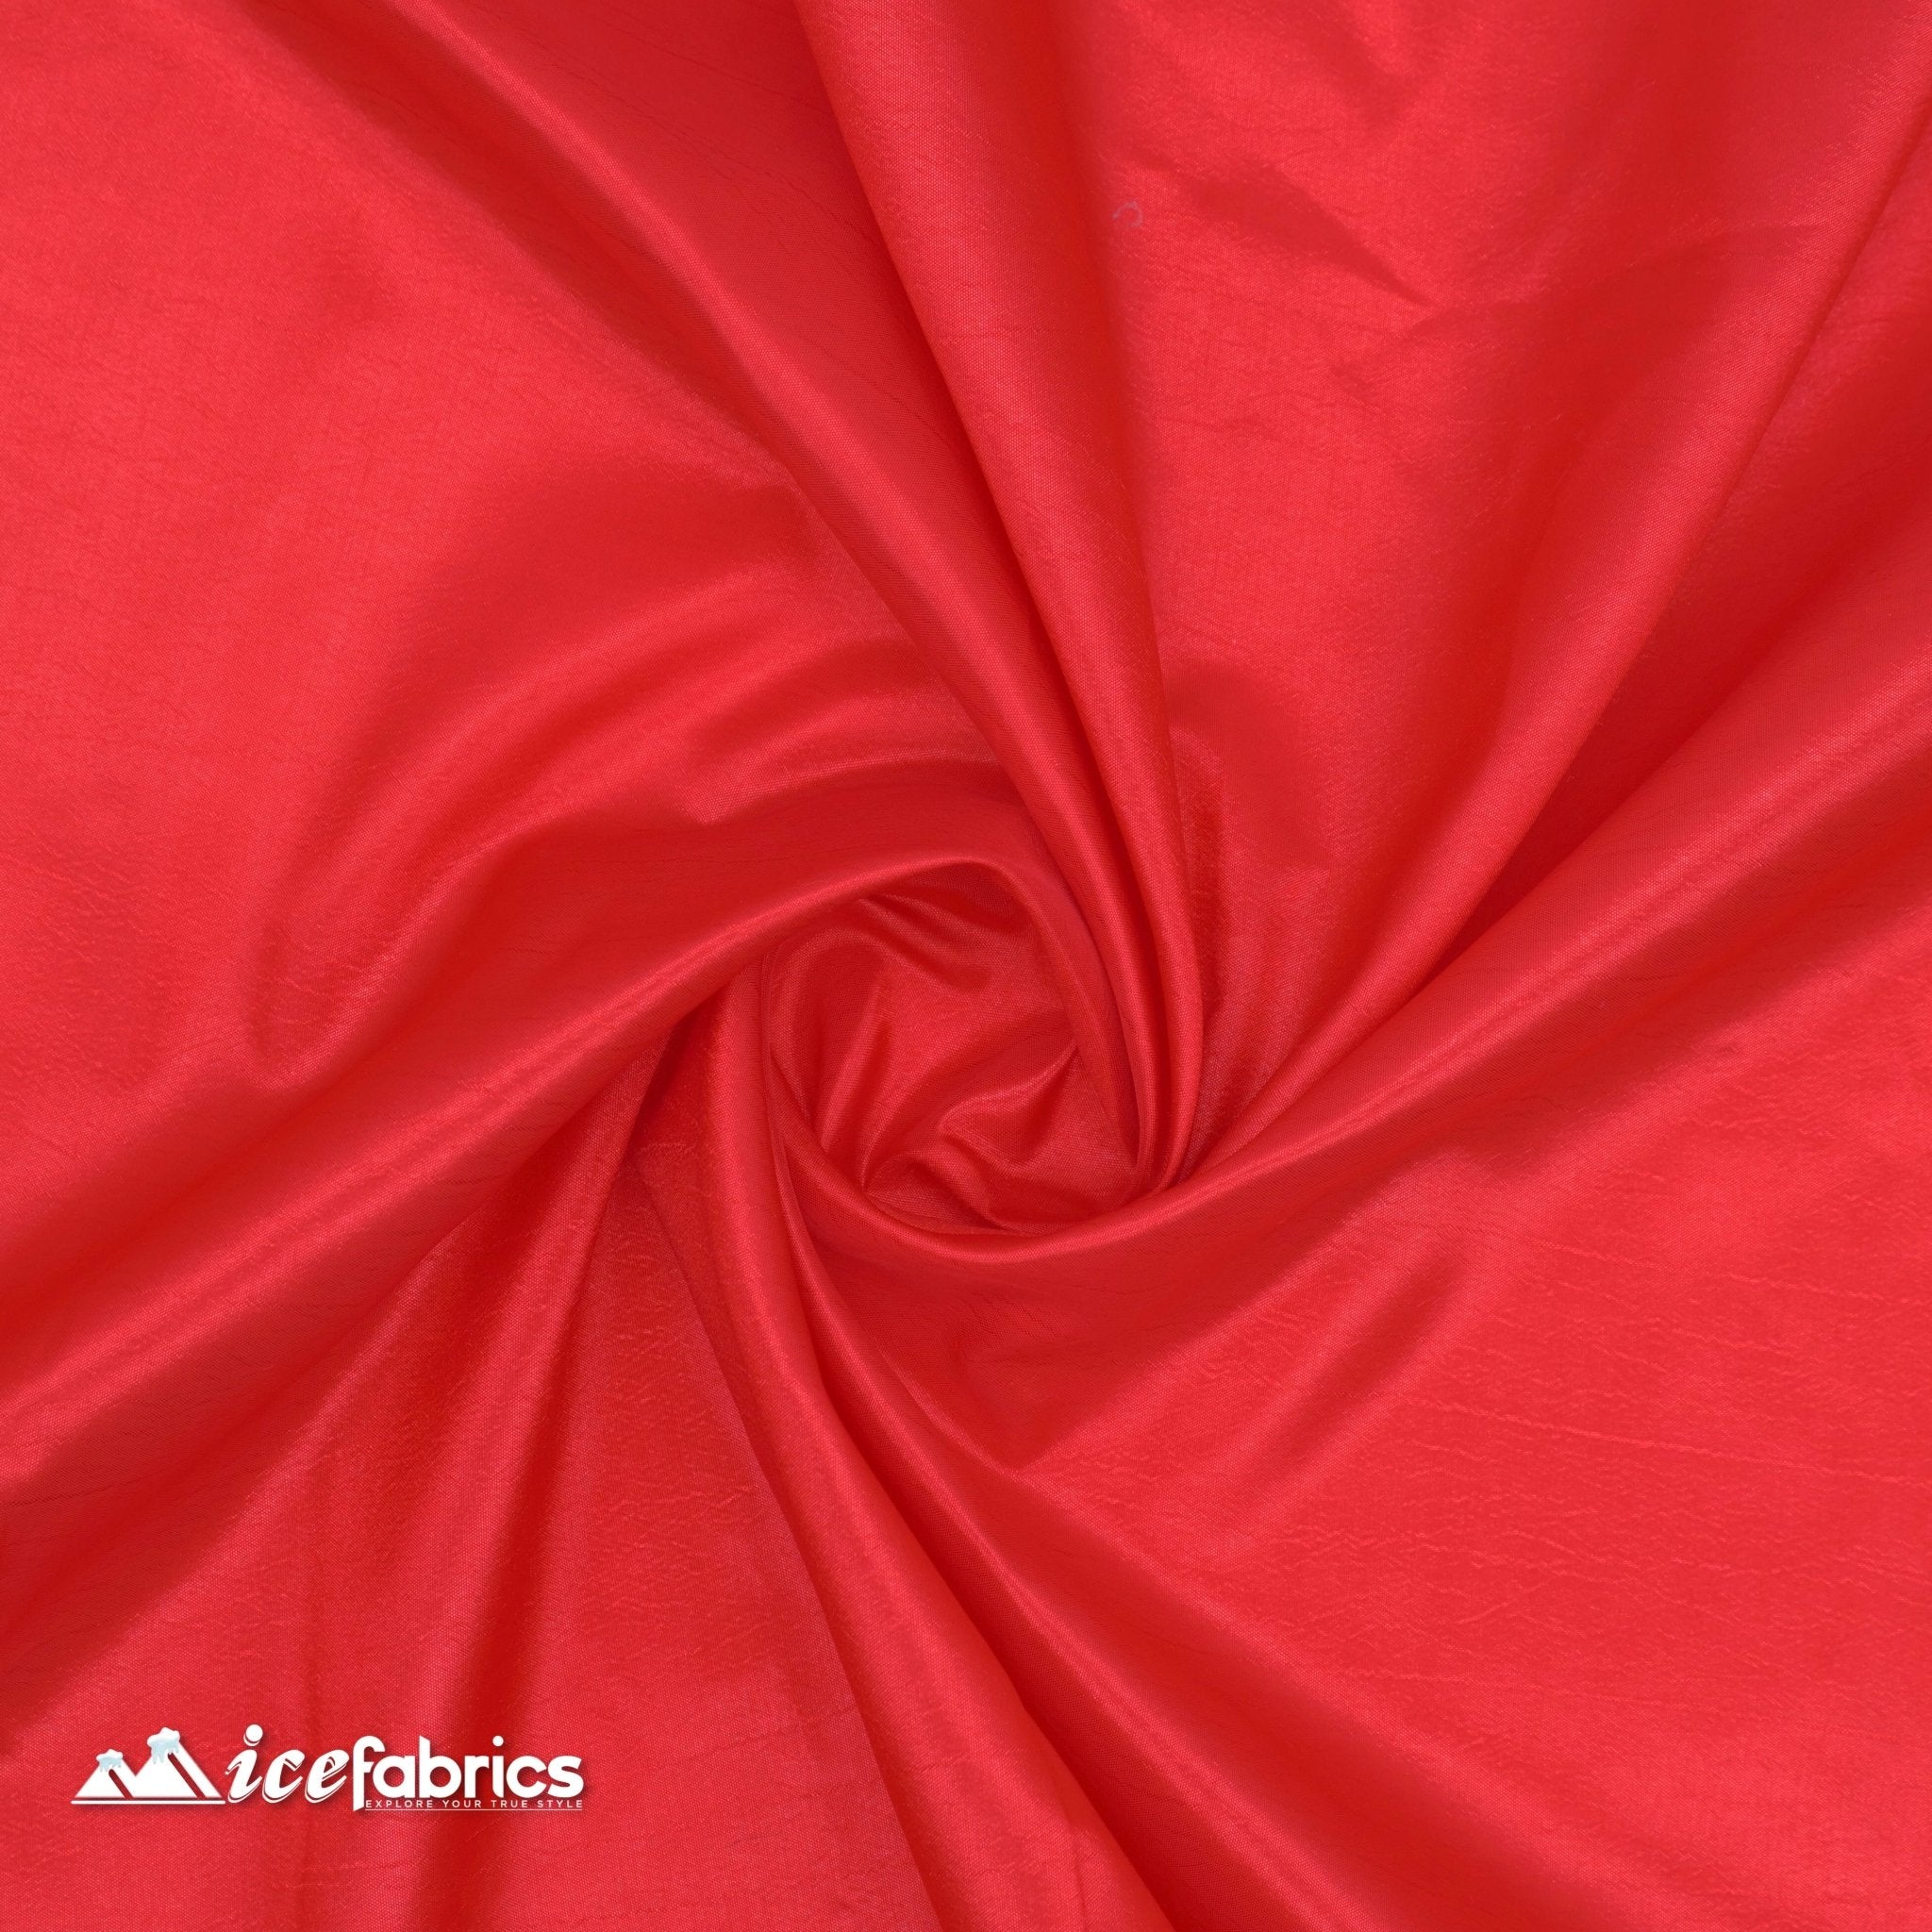 High Quality Solid Taffeta Fabric_ 60" Width_ By The YardTaffeta FabricICEFABRICICE FABRICSRedHigh Quality Solid Taffeta Fabric_ 60" Width_ By The Yard ICEFABRIC Red